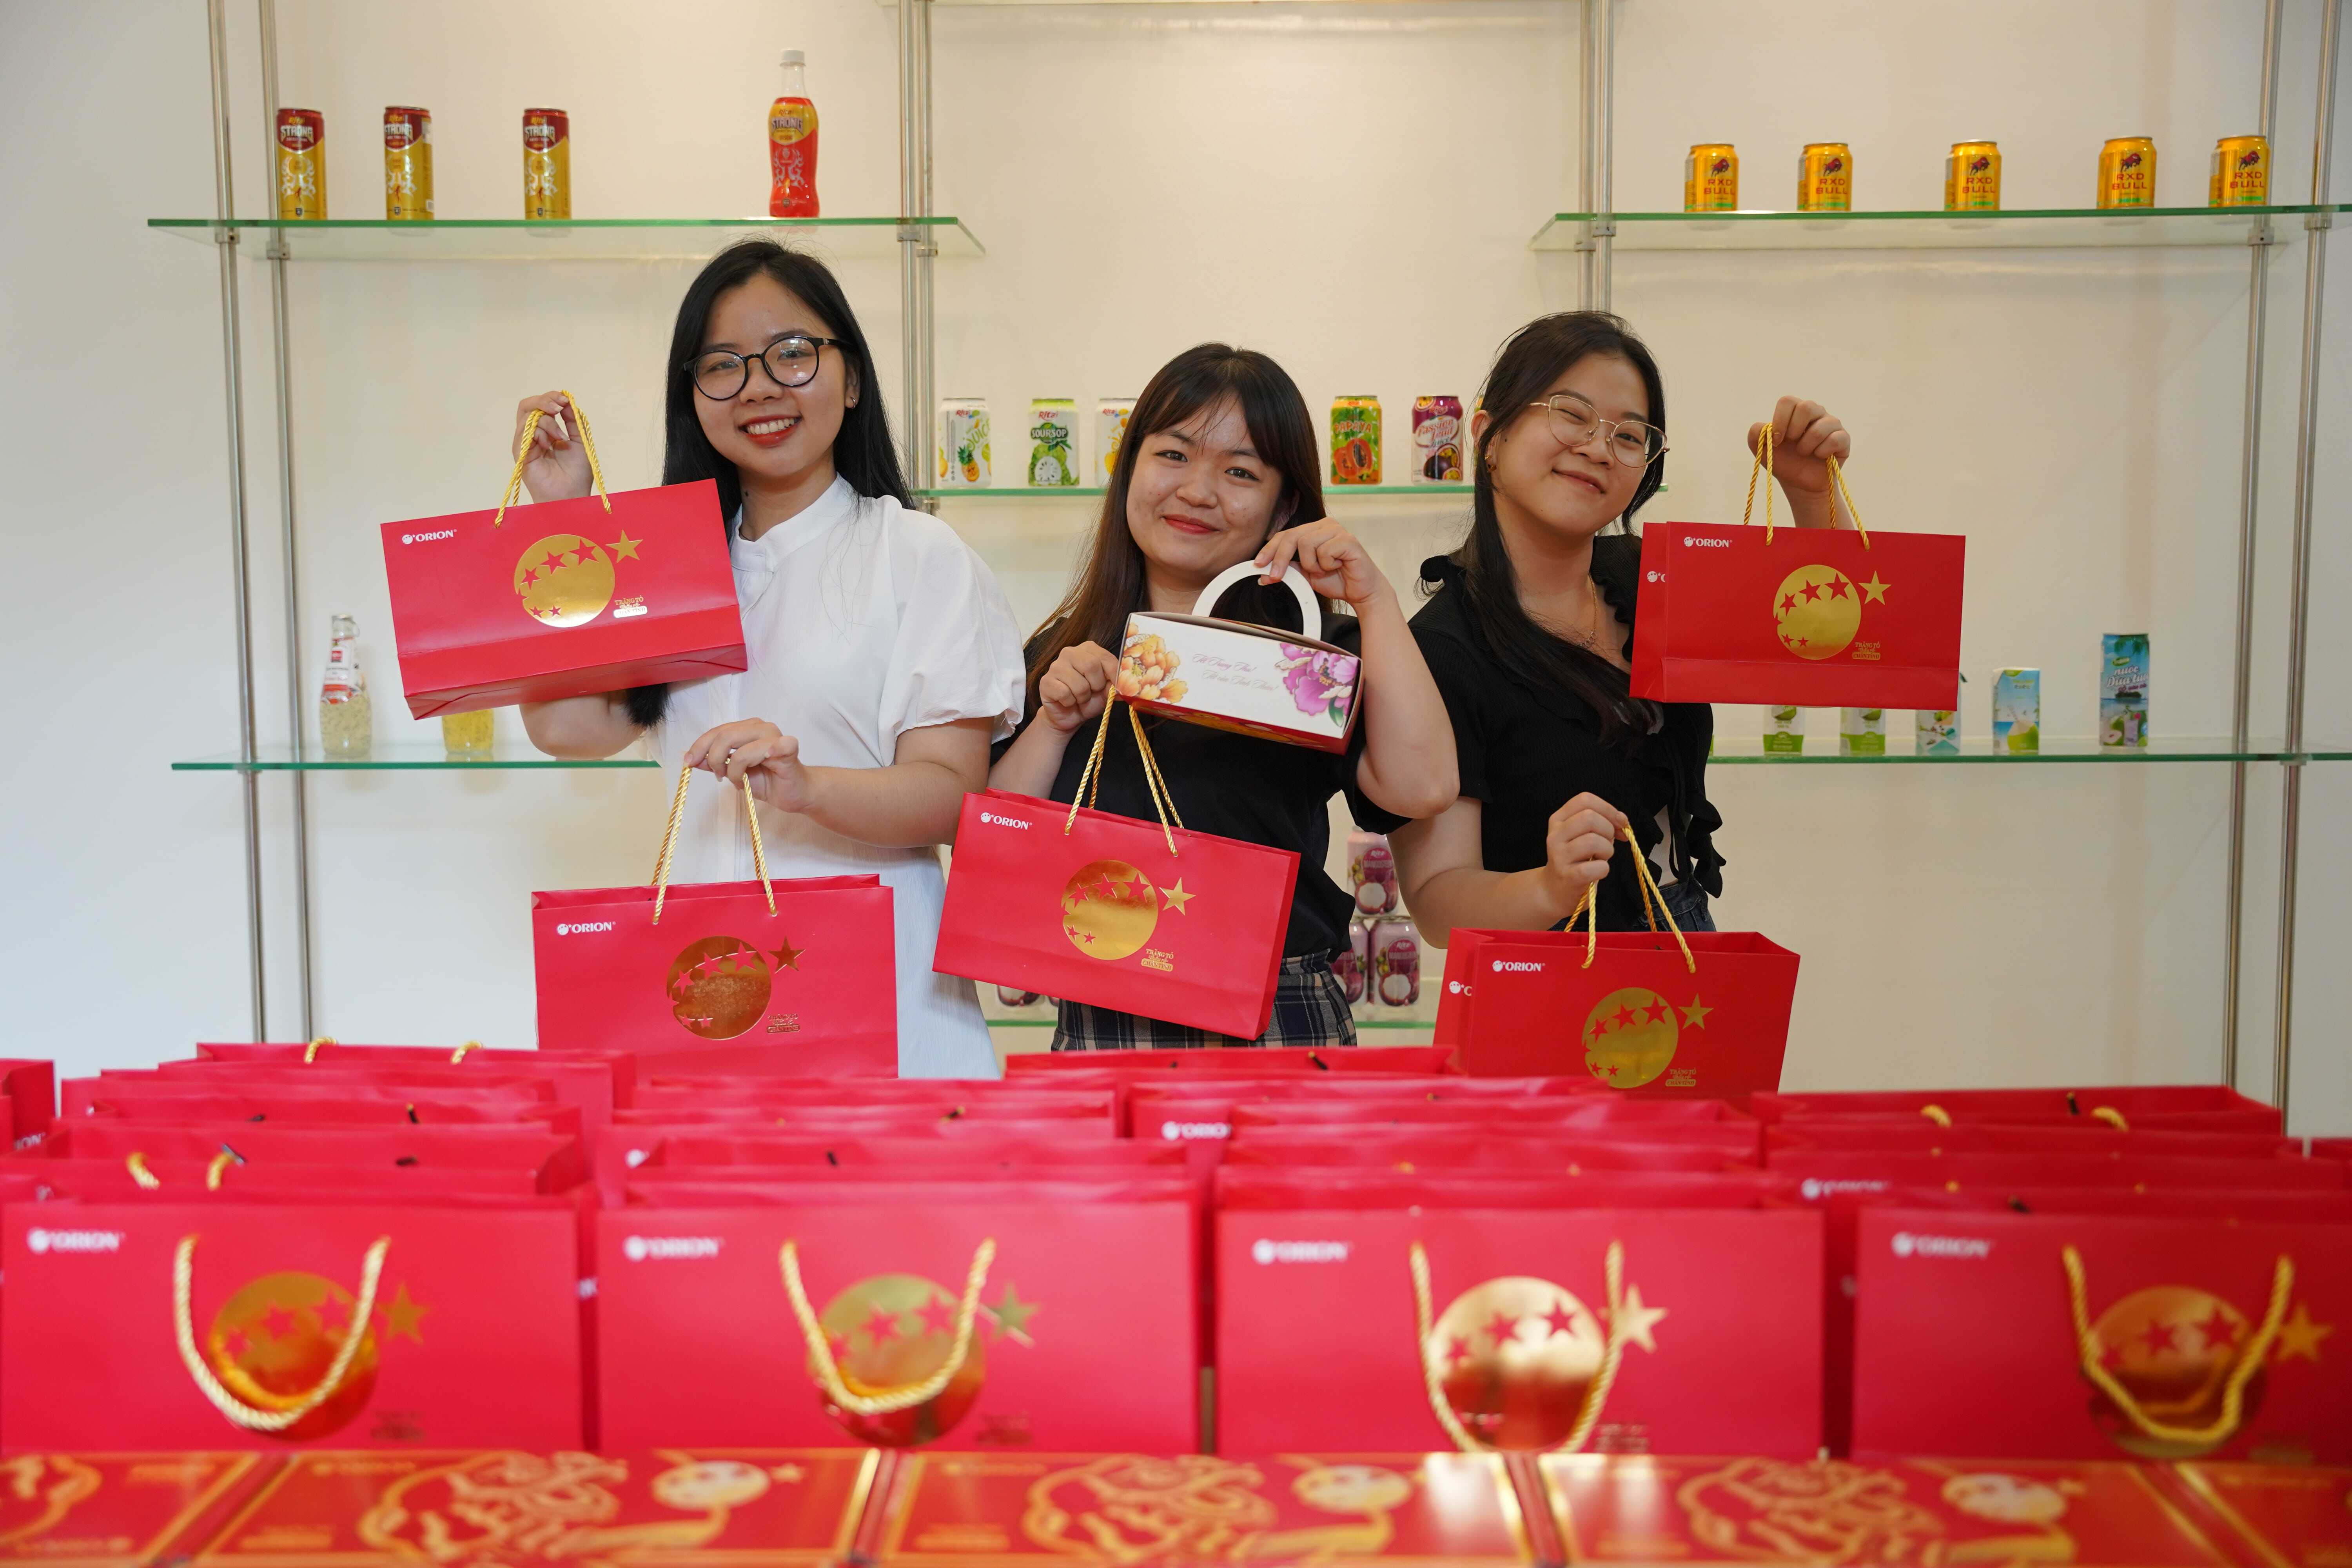 Rita's Delightful Employee Gifts for the Enchanted Mid-Autumn Festival